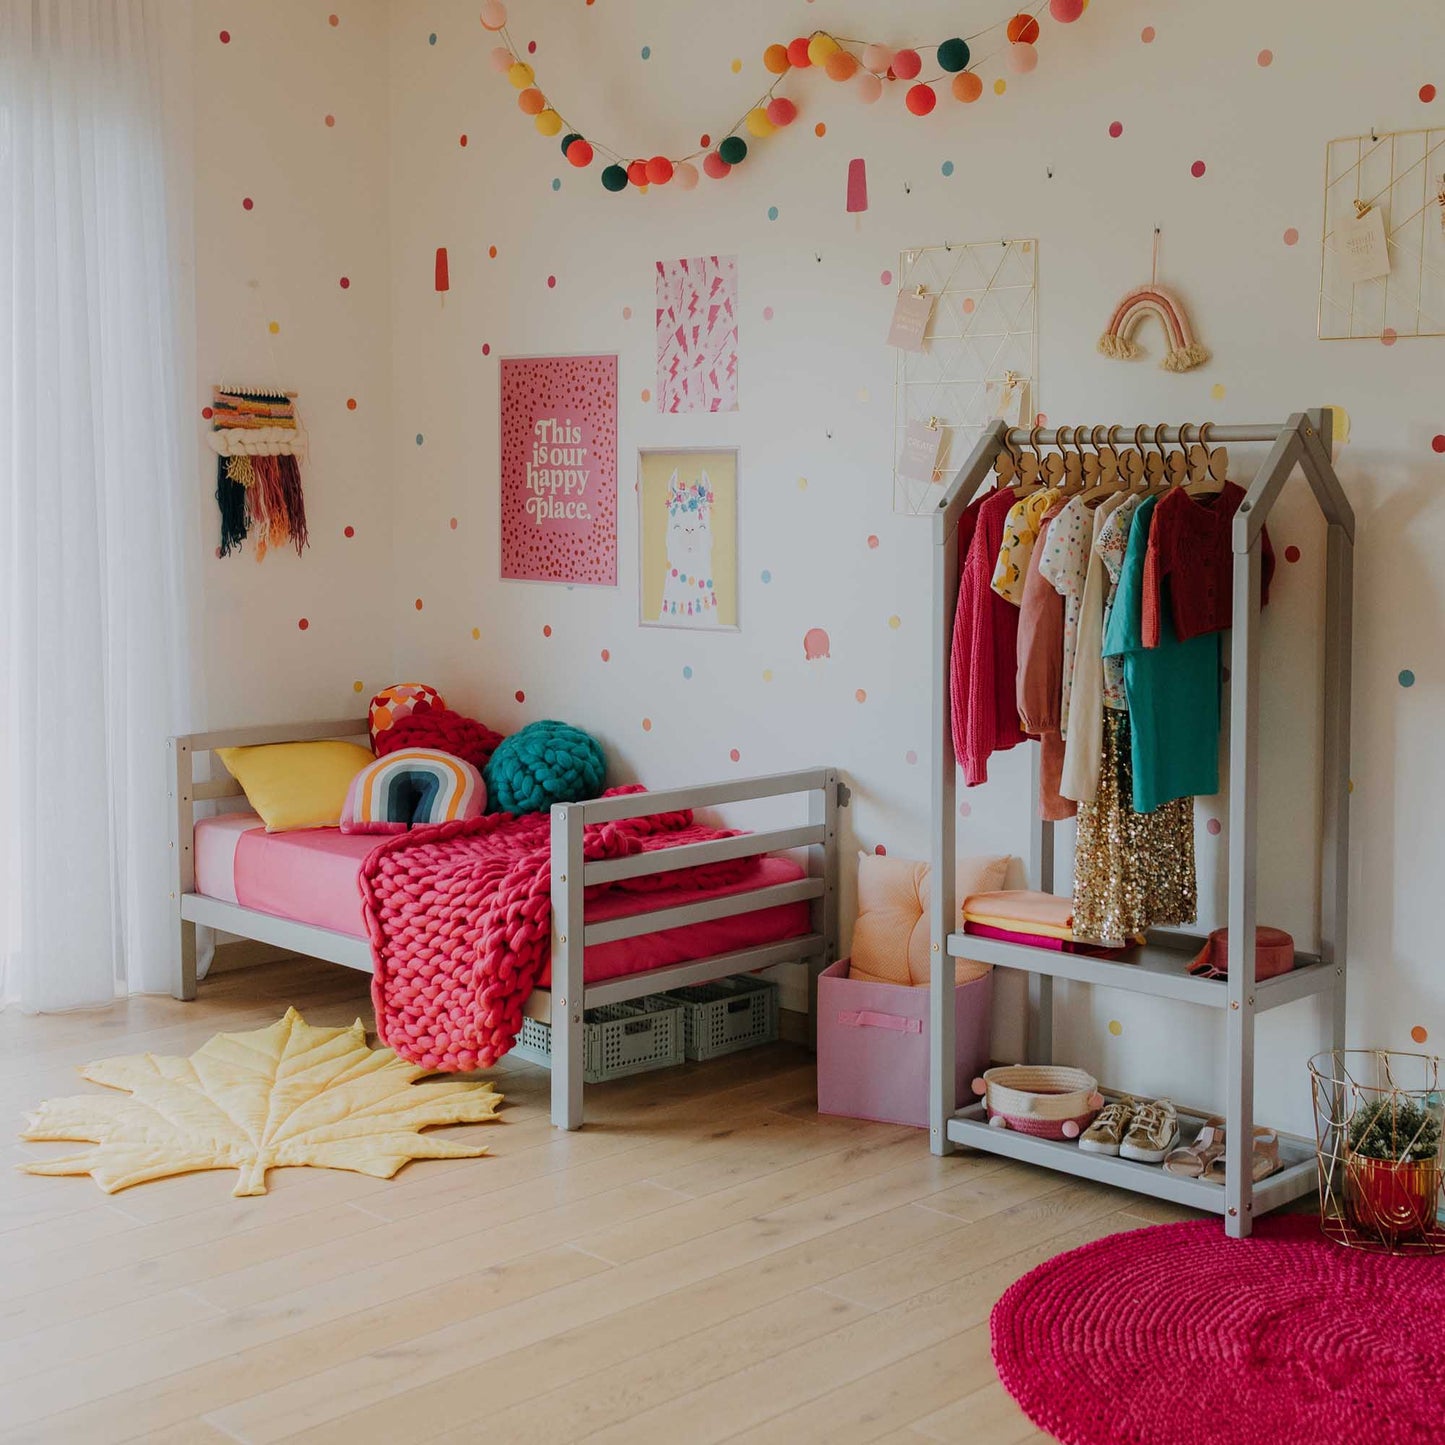 A girl's room with polka dots and a Sweet Home From Wood kids' bed on legs with a horizontal rail headboard and footboard.